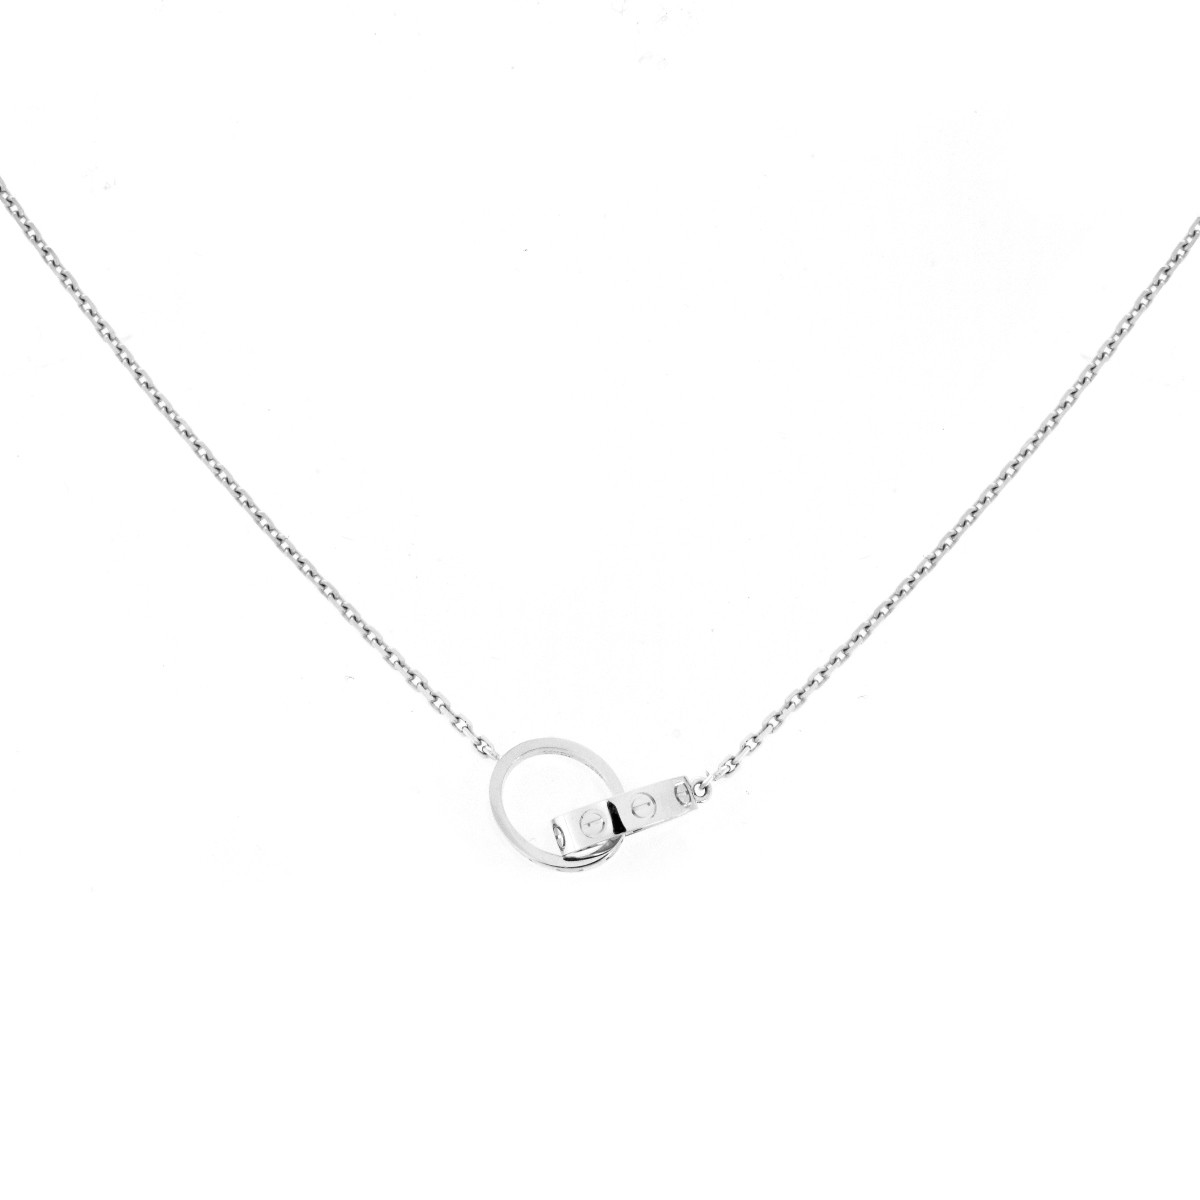 Cartier Love Ring Pendant Necklace